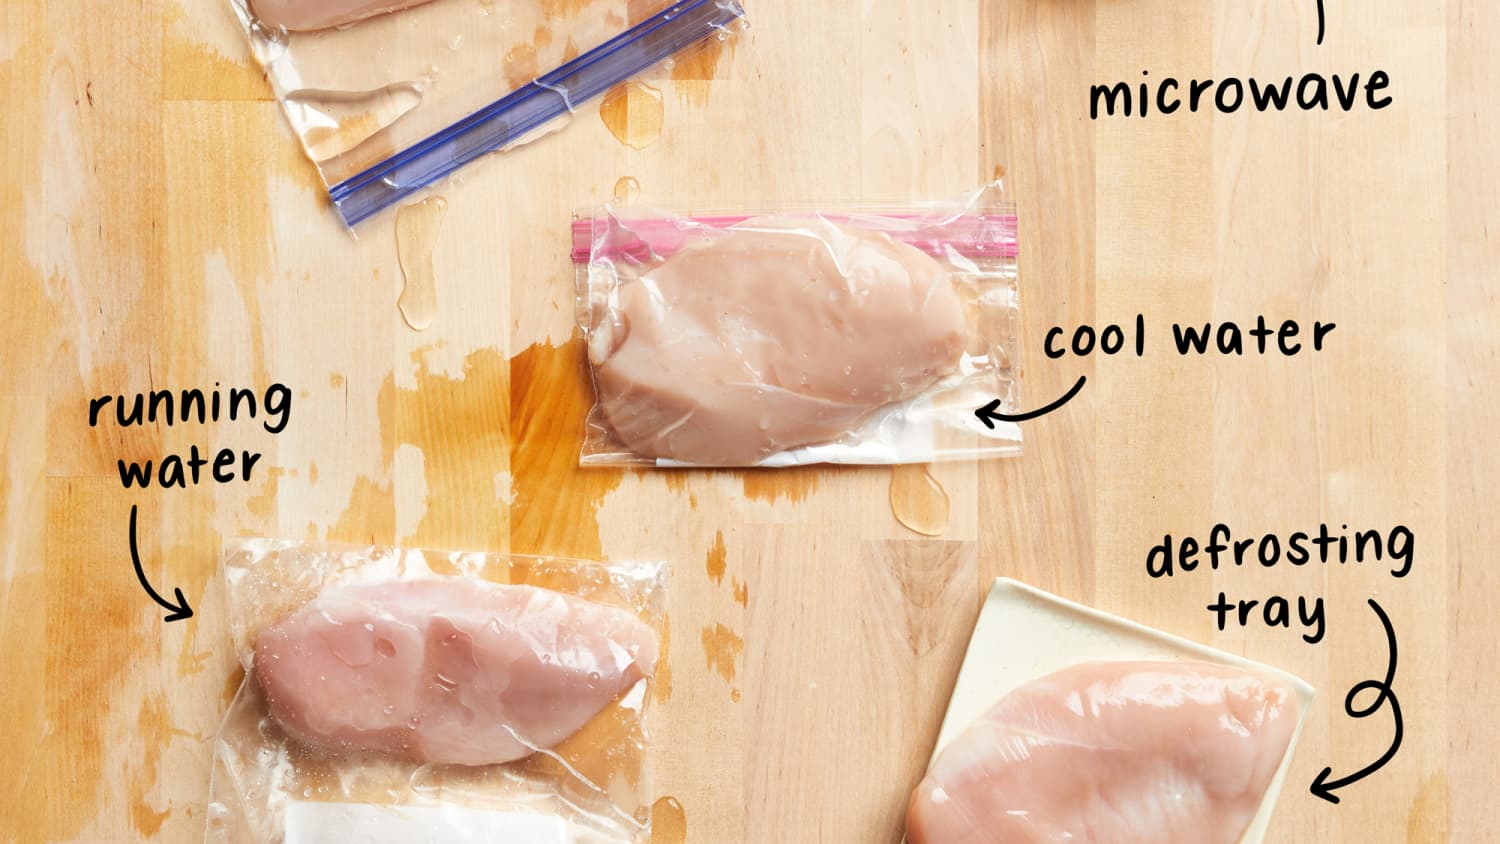 To chicken how defrost How To